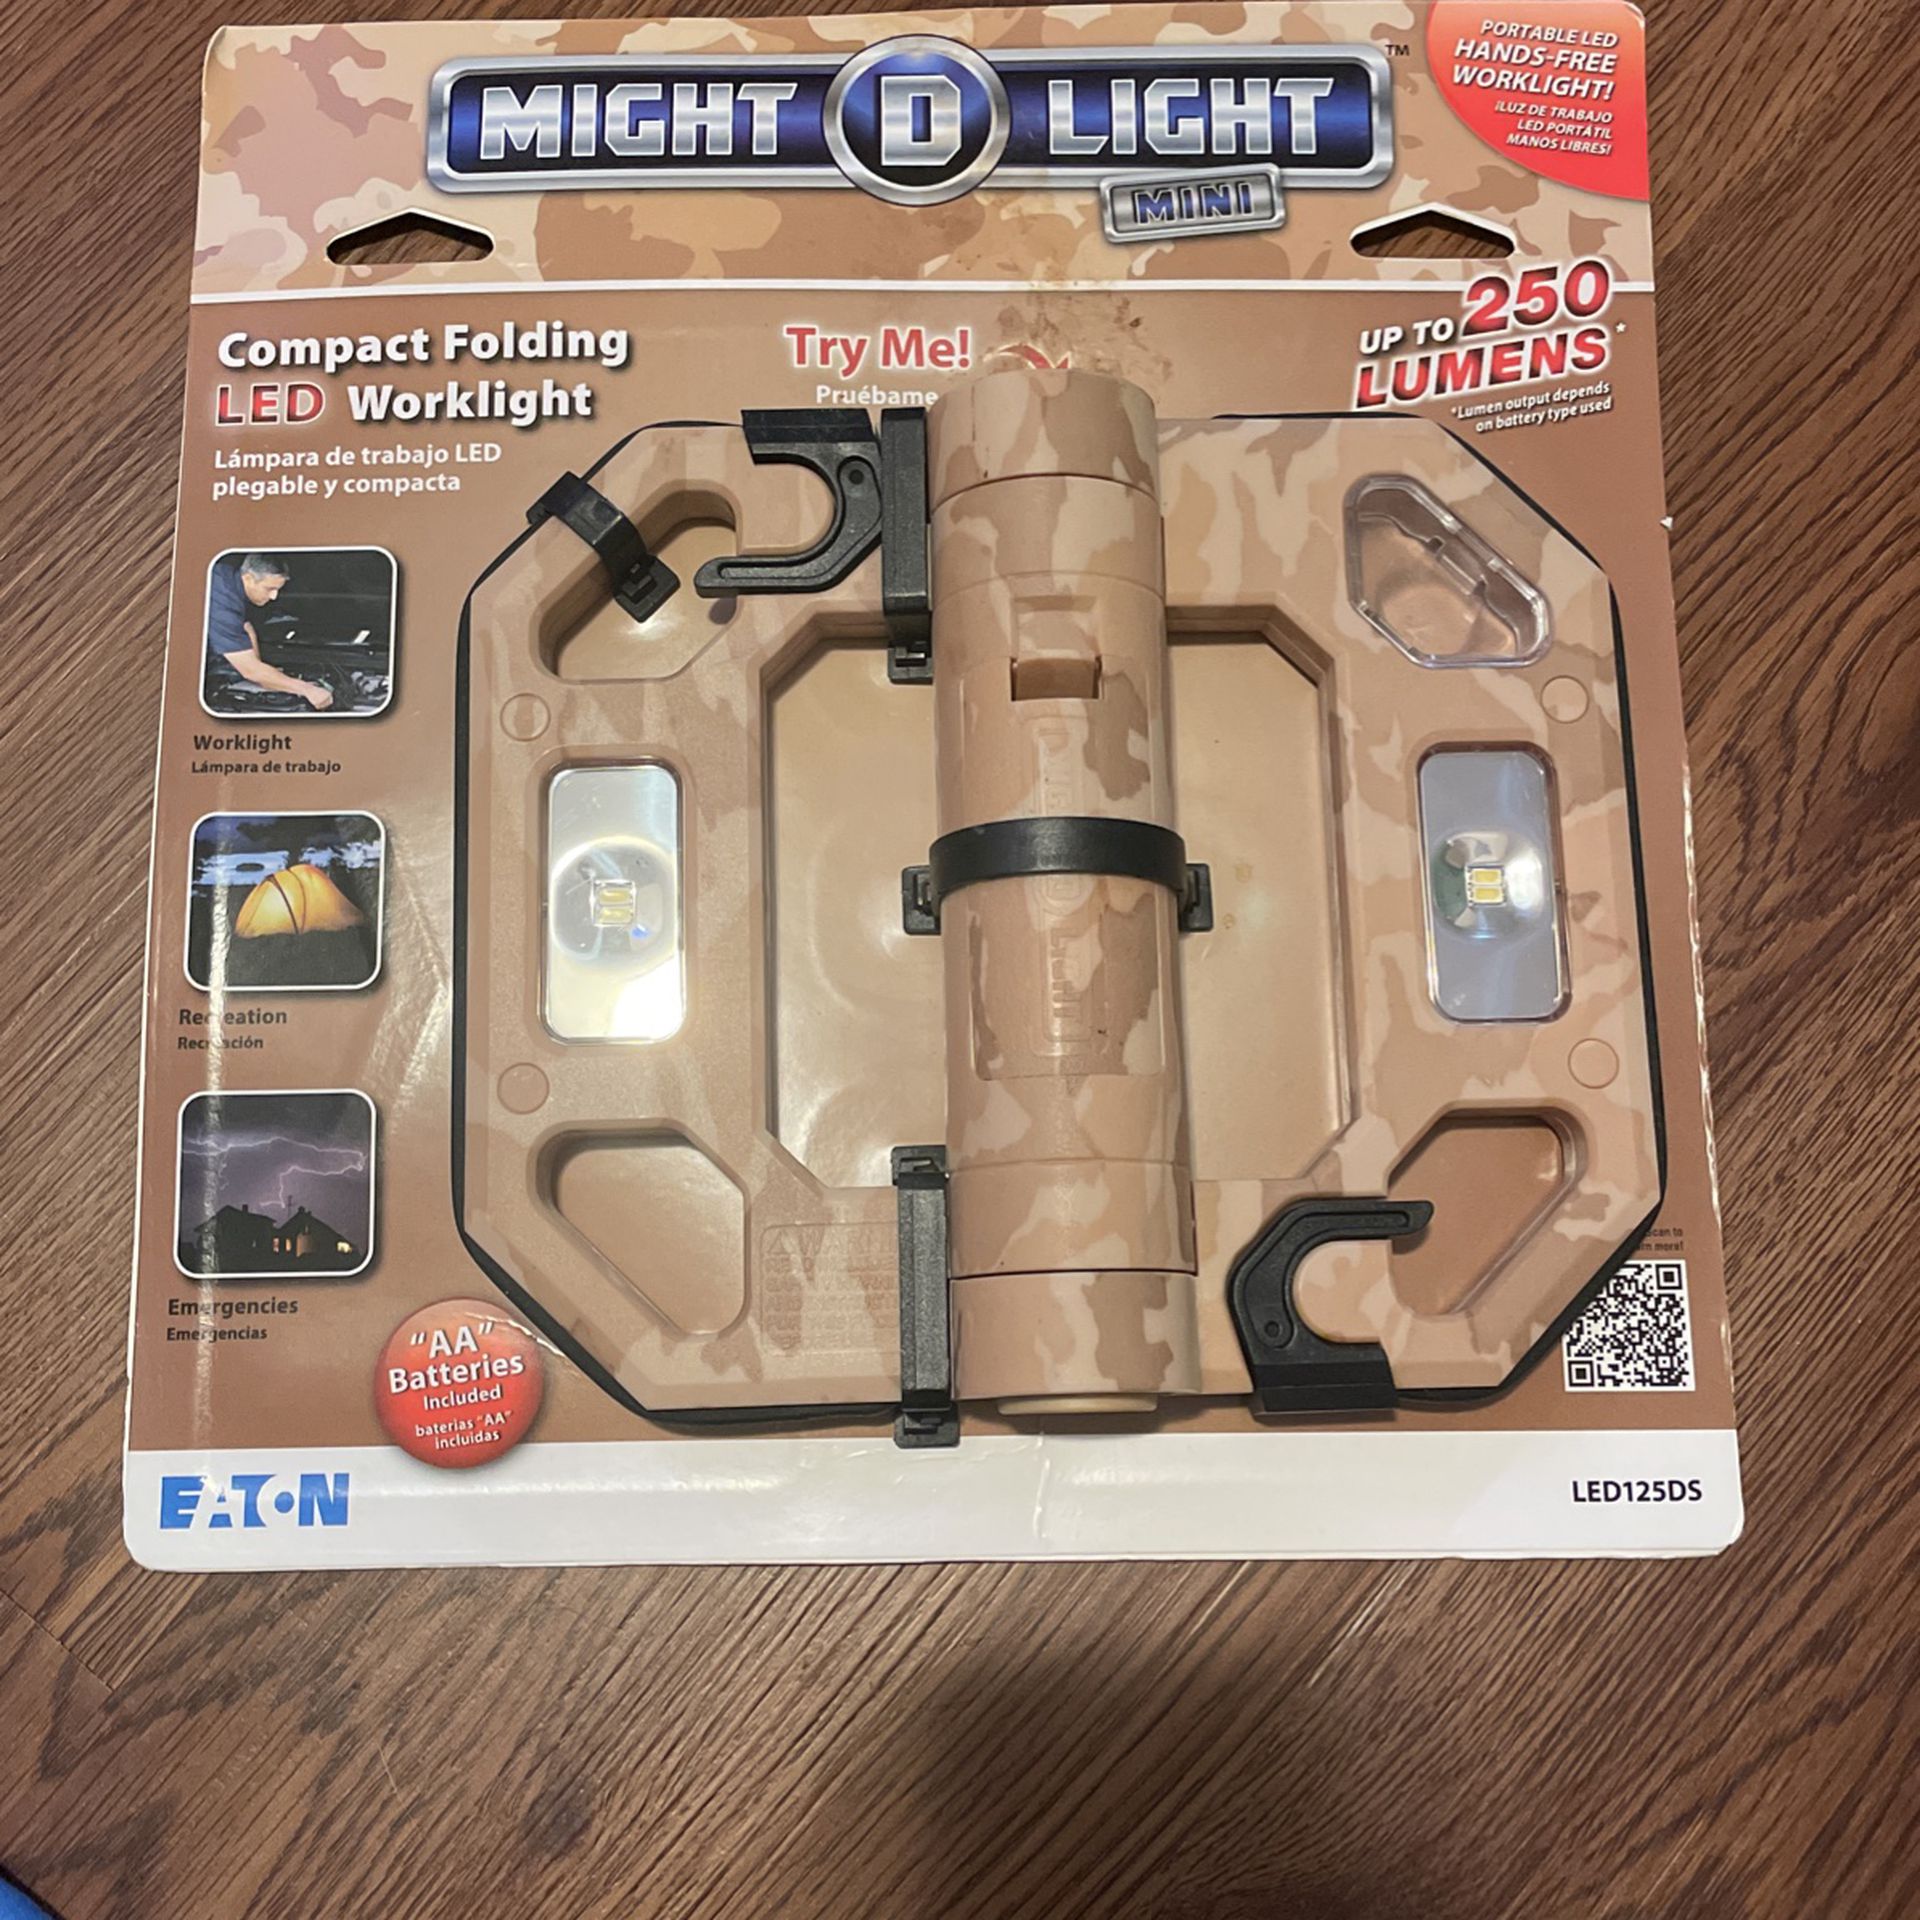 Brand New Portable Light Great For Car Repairs, Emergency Lights, And Weather Events!